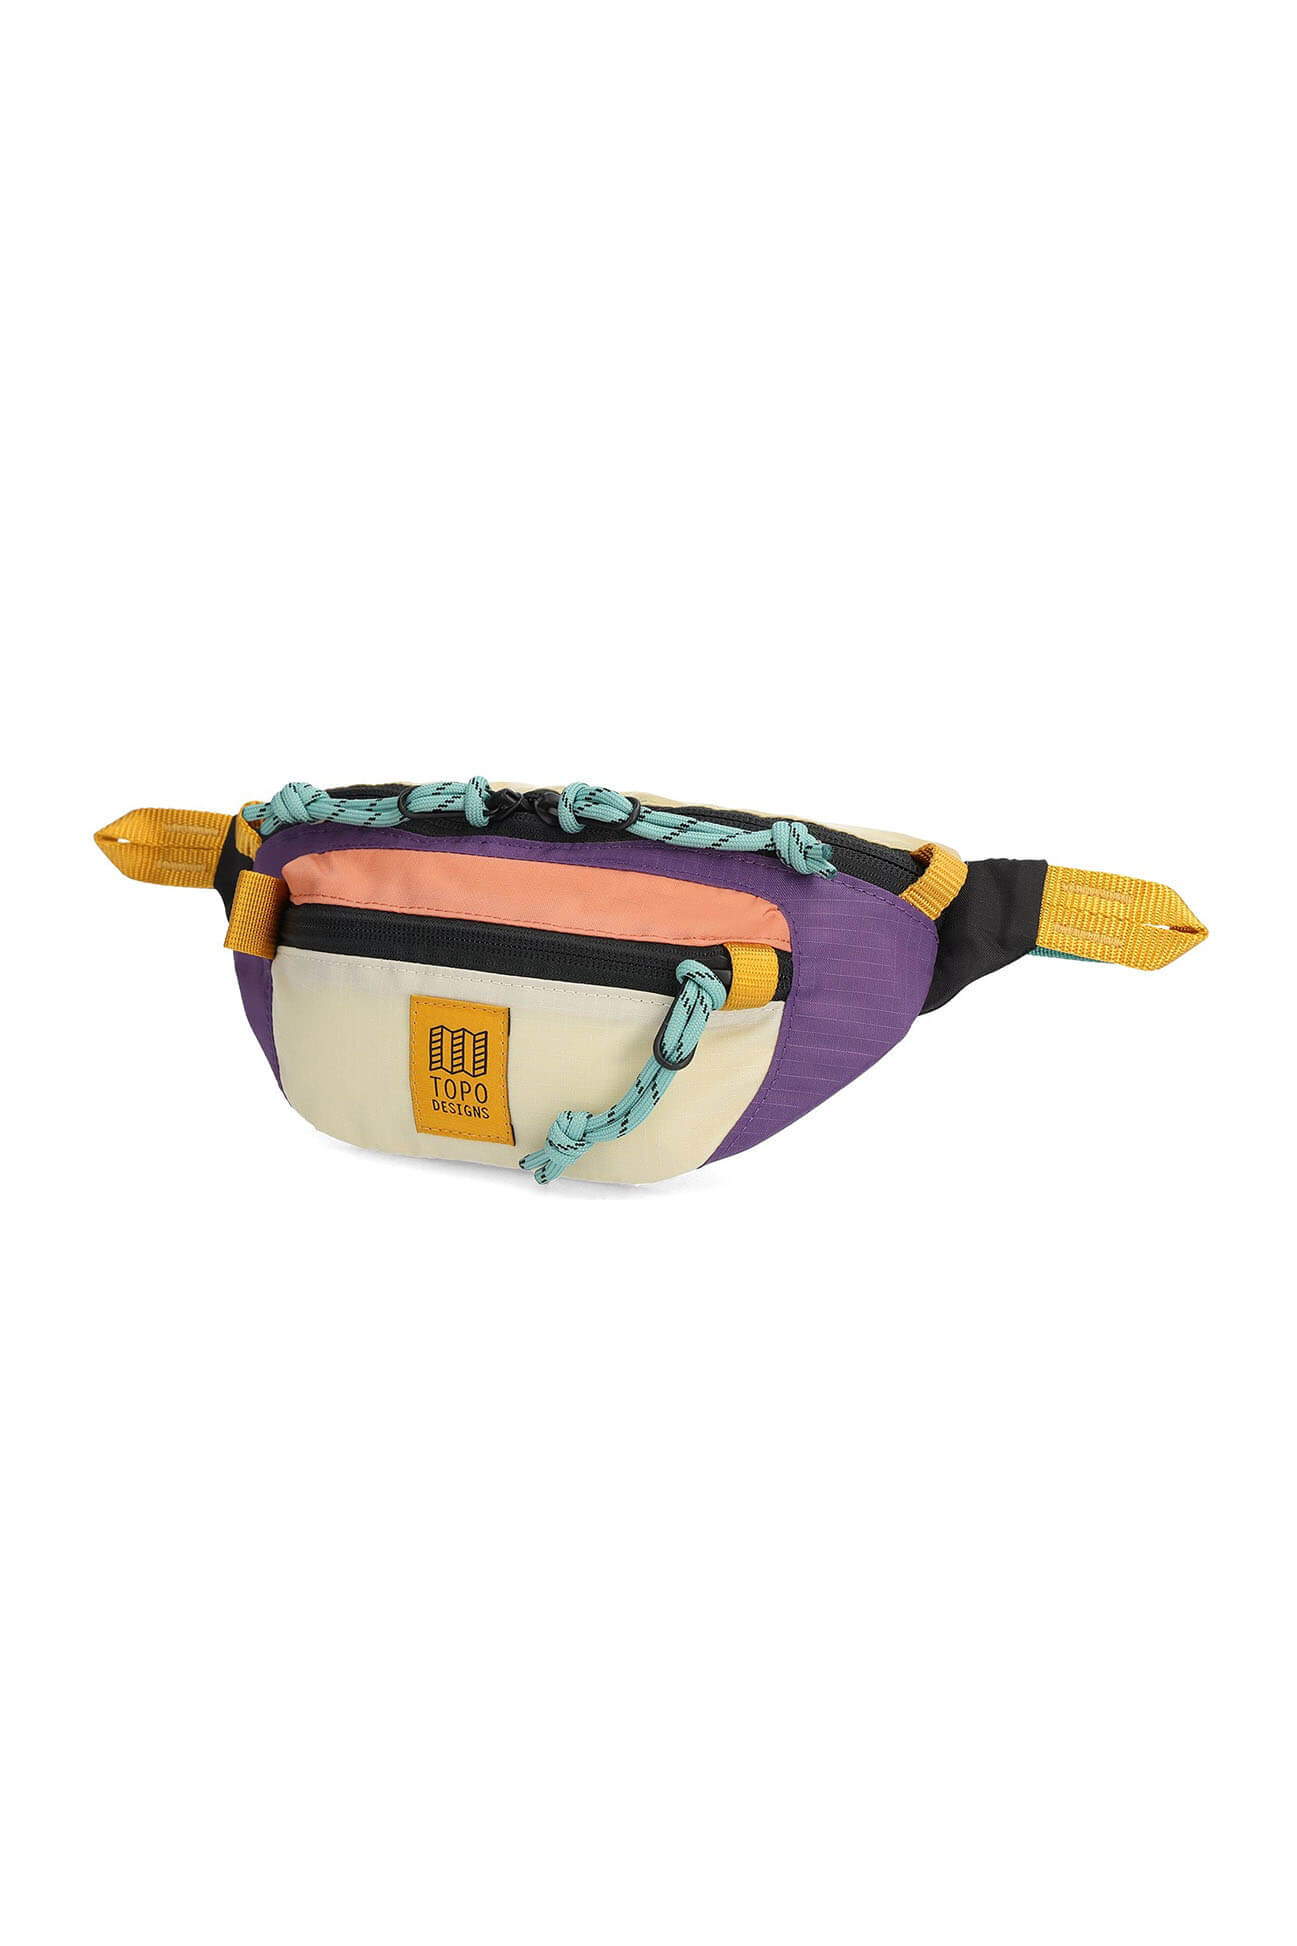 Topo Designs mountain waist pack in loganberry and bone white